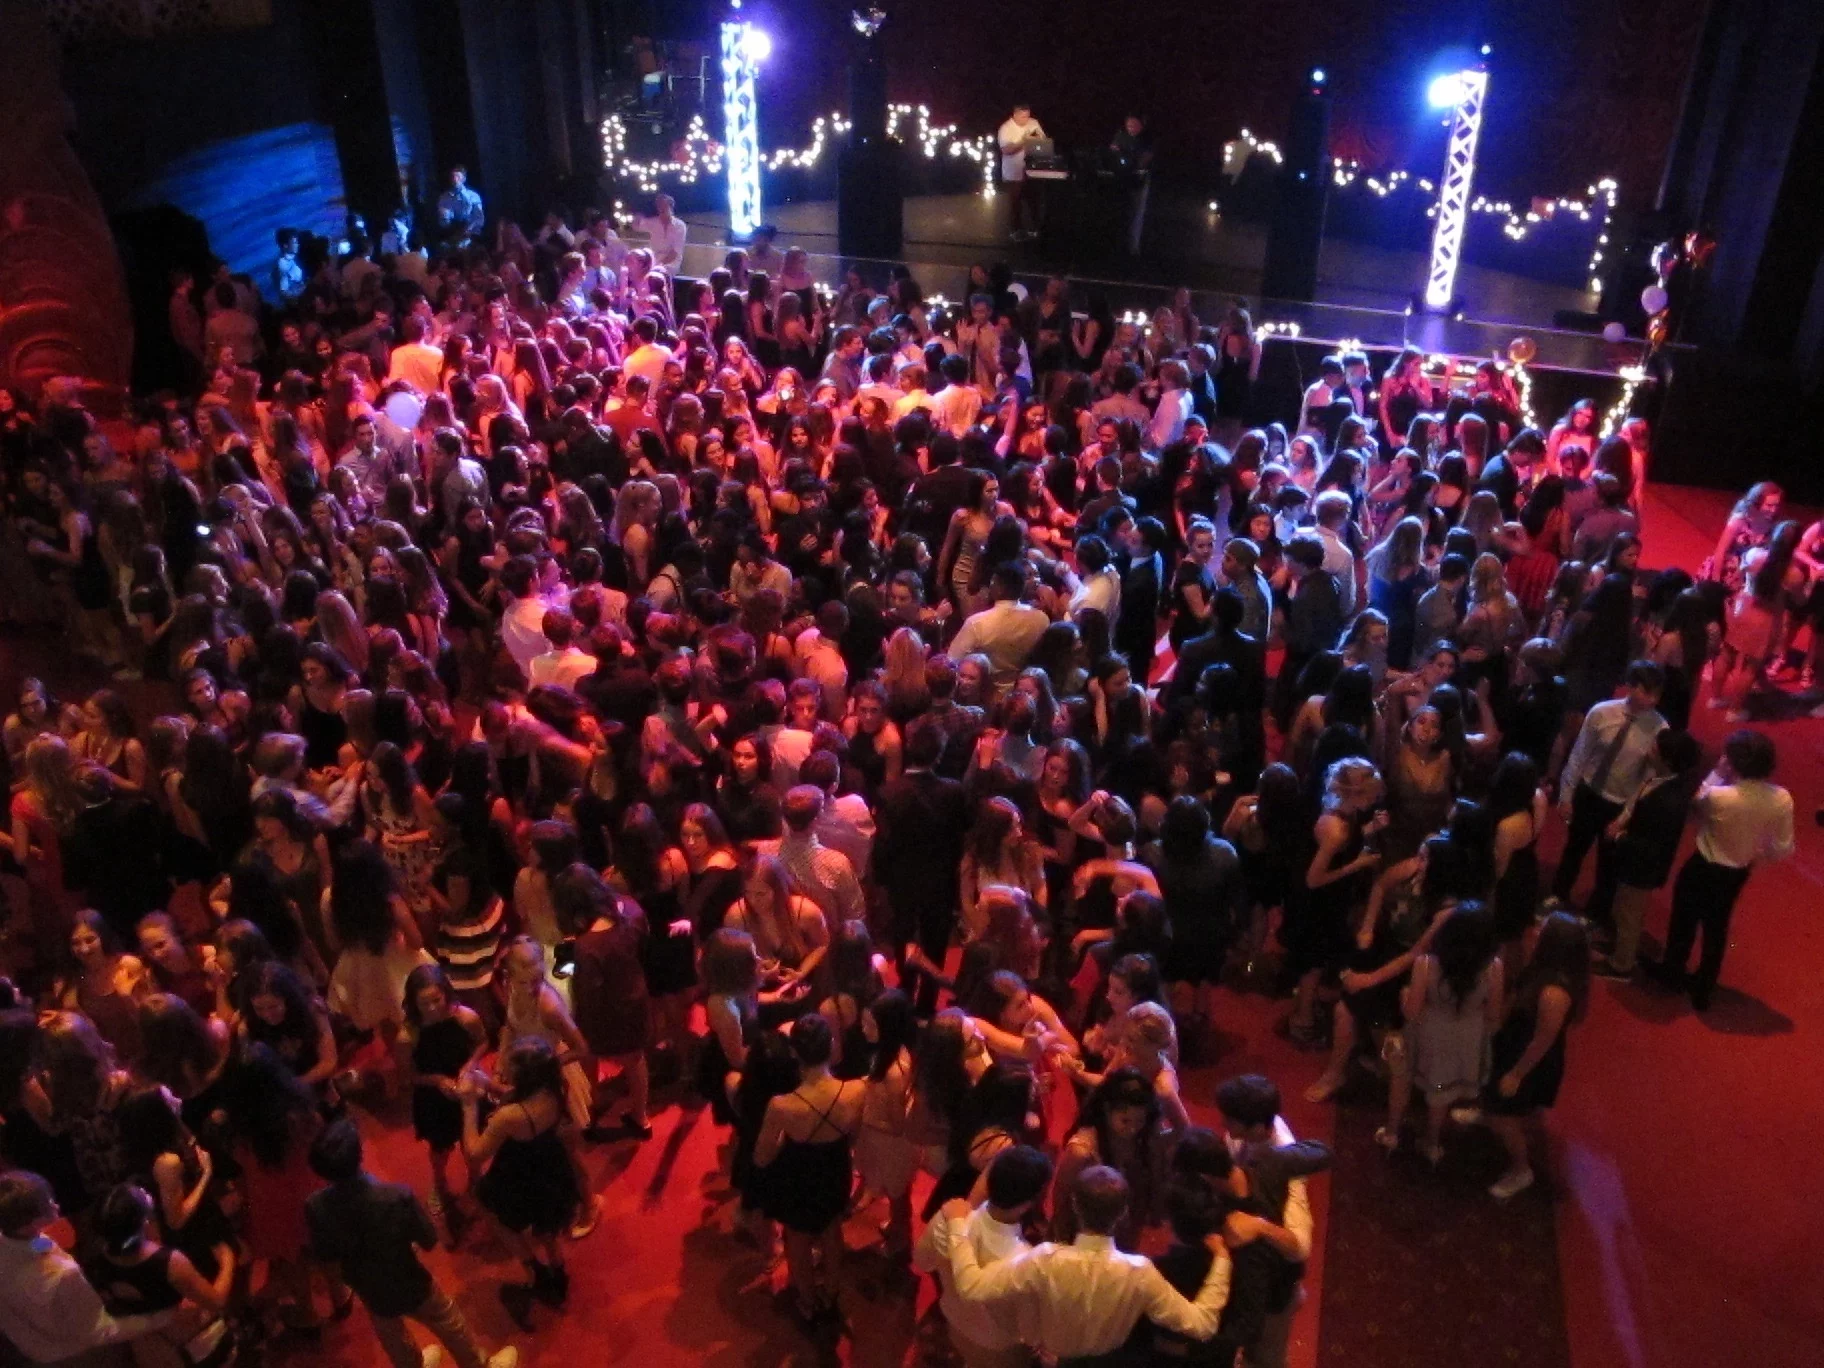 “City Under The Stars” Homecoming dance concludes a successful spirit week